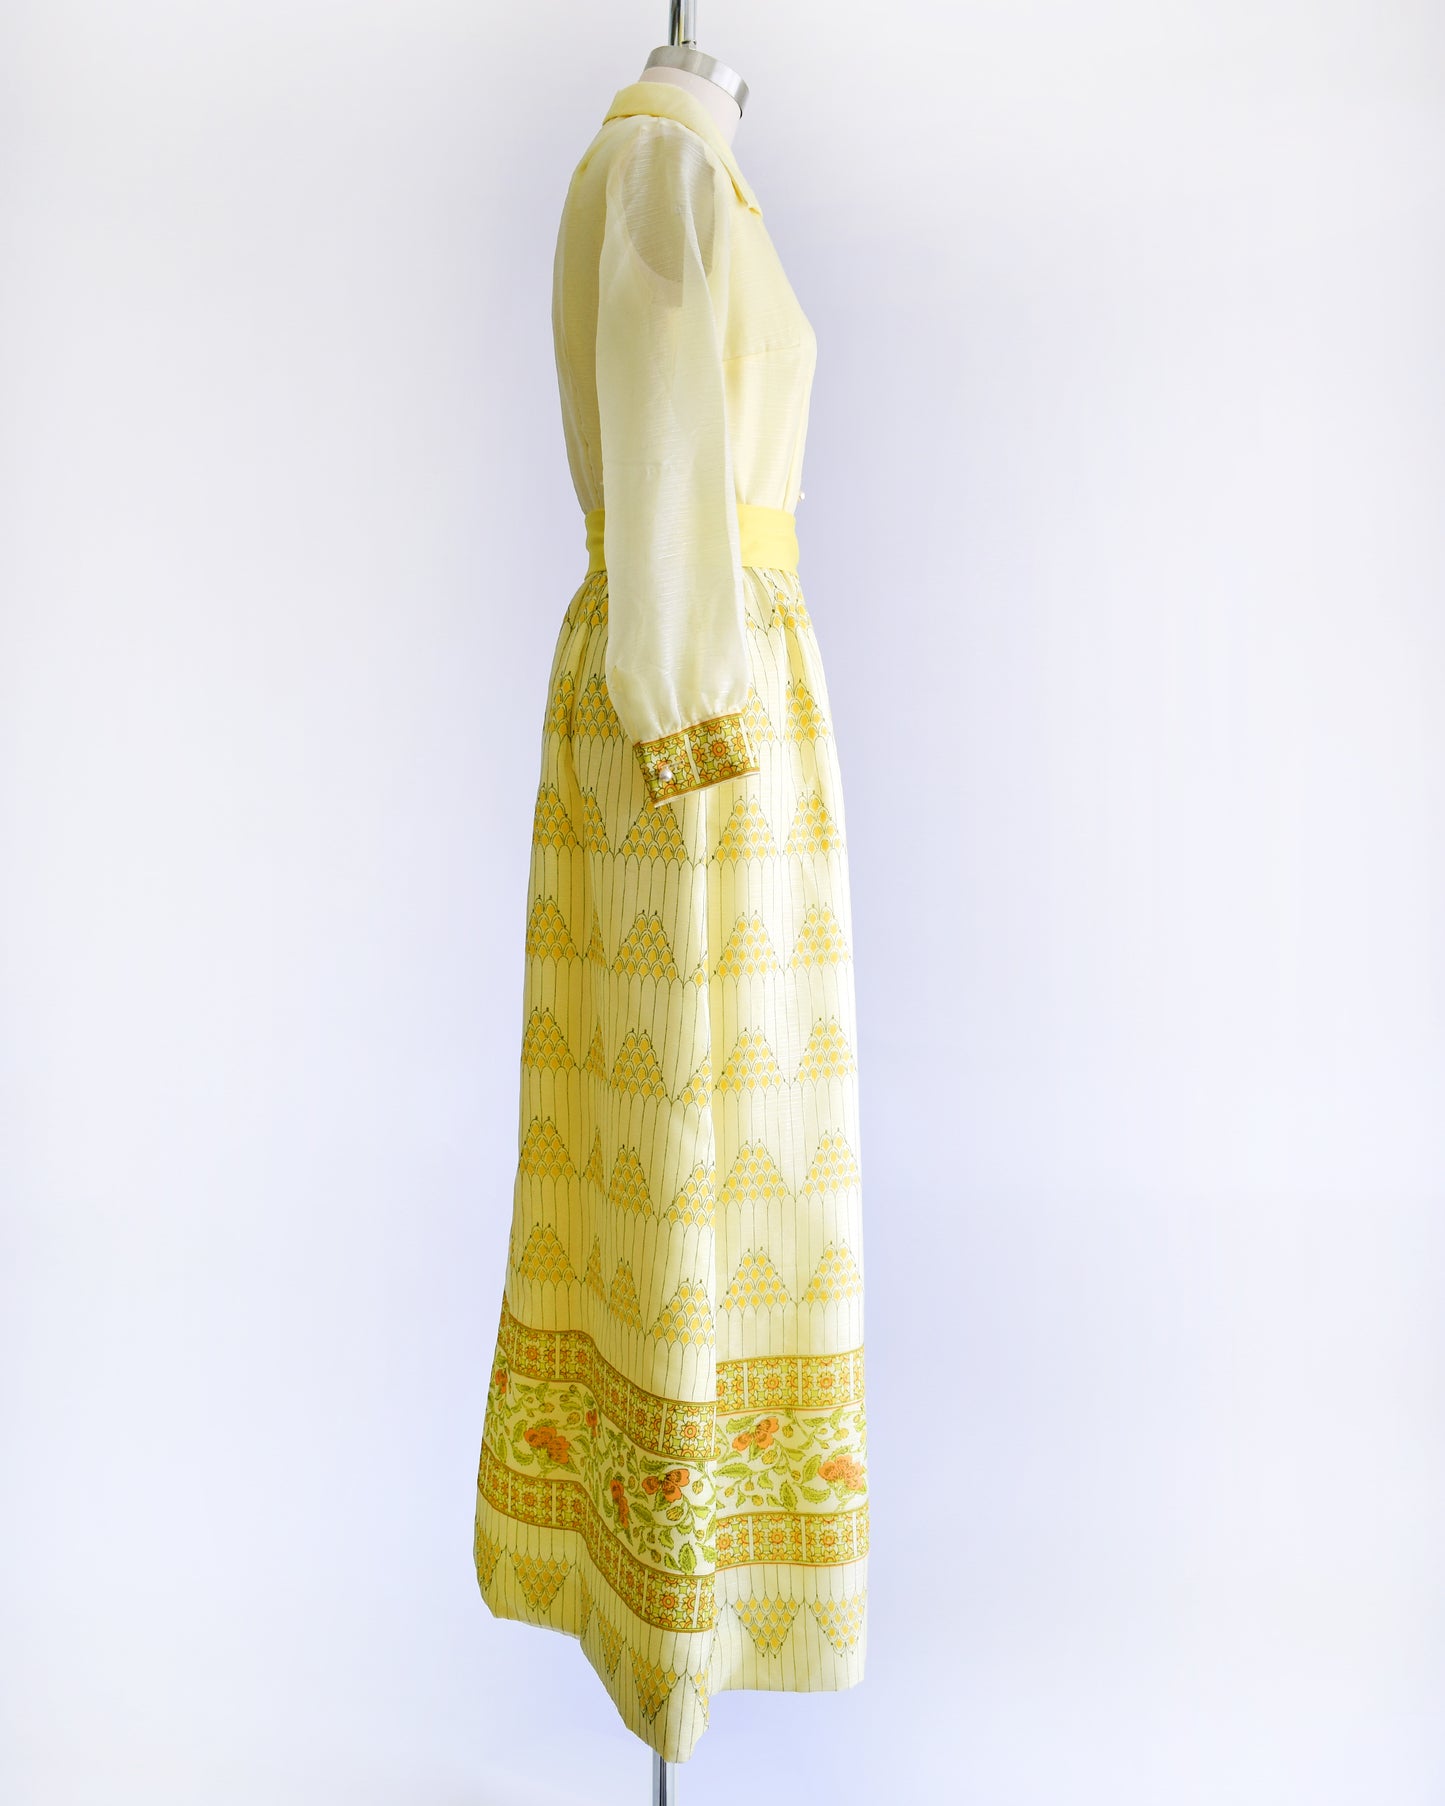 Side view of a yellow vintage maxi dress on a dress form. The dress features a collared neckline, semi sheer long sleeves, button down front, yellow sash belt, and a maxi skirt that has a pyramid and floral print.